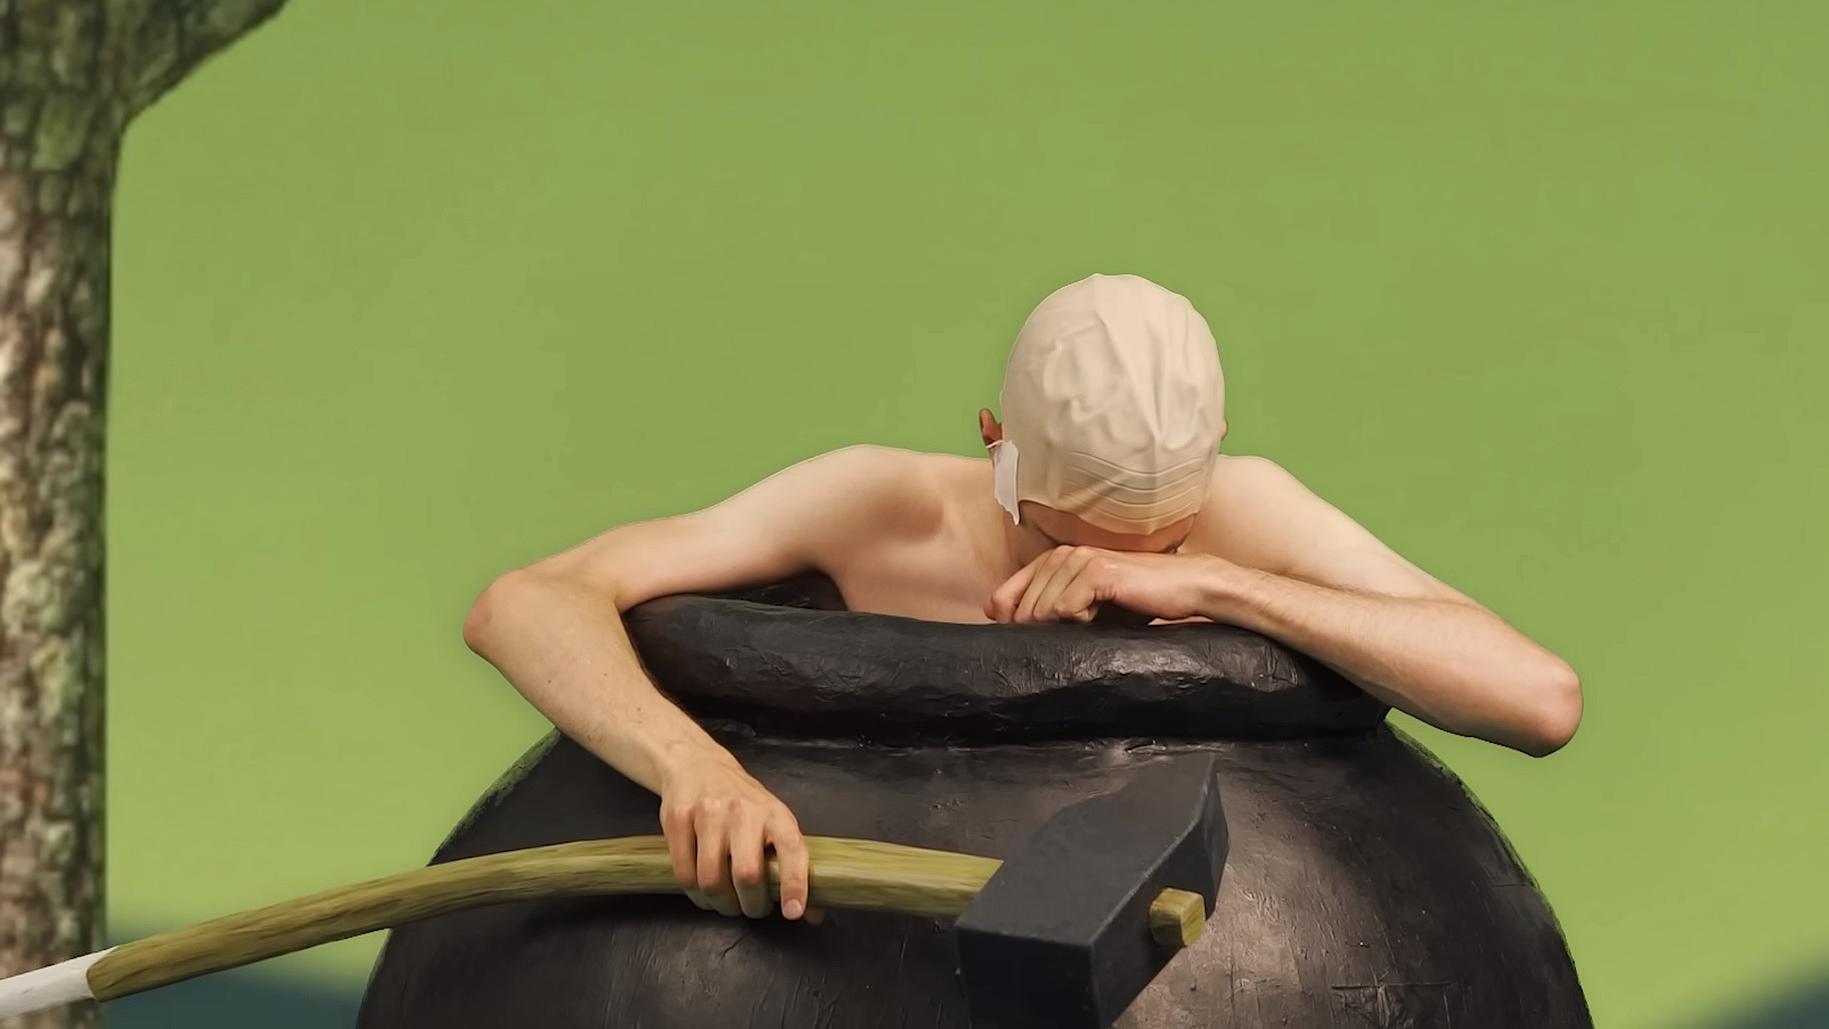 Getting over it with Bennett Foddy